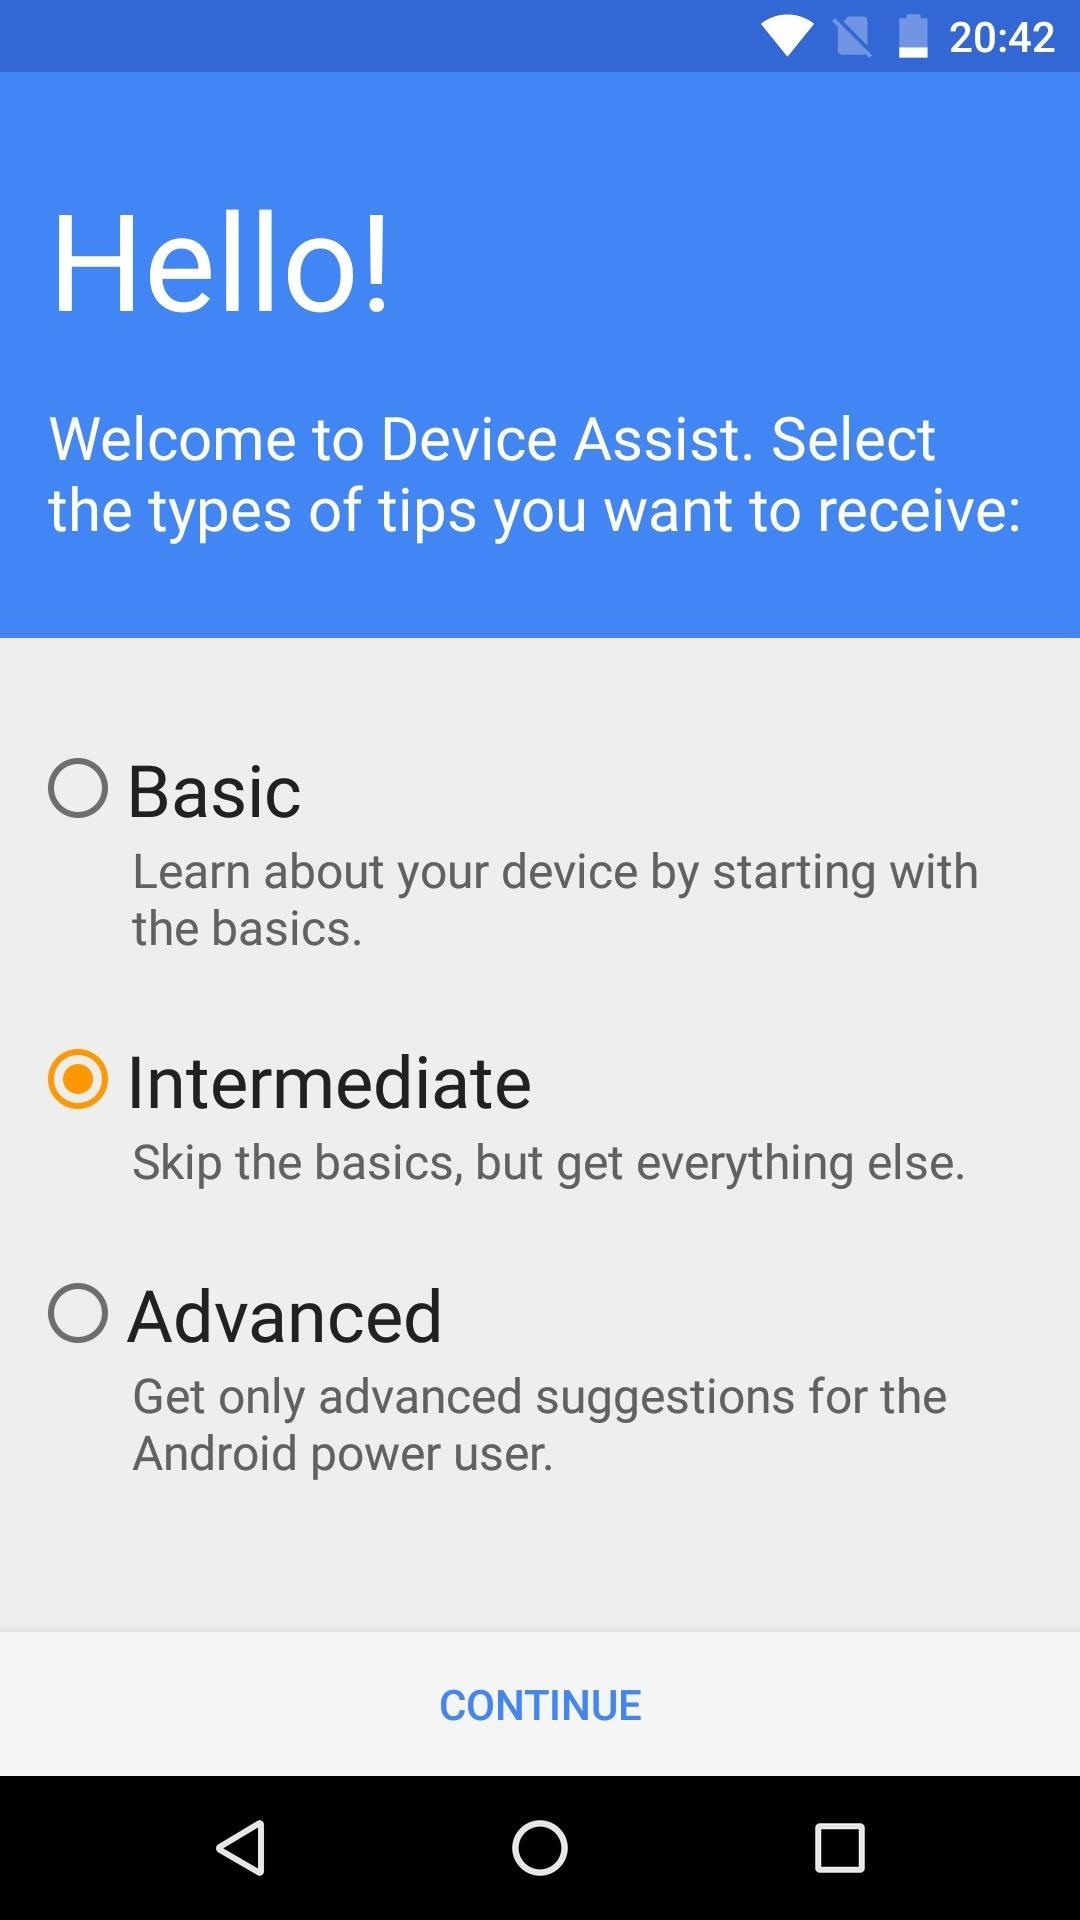 This Google App Makes Sure Your Device Runs Smooth All the Time